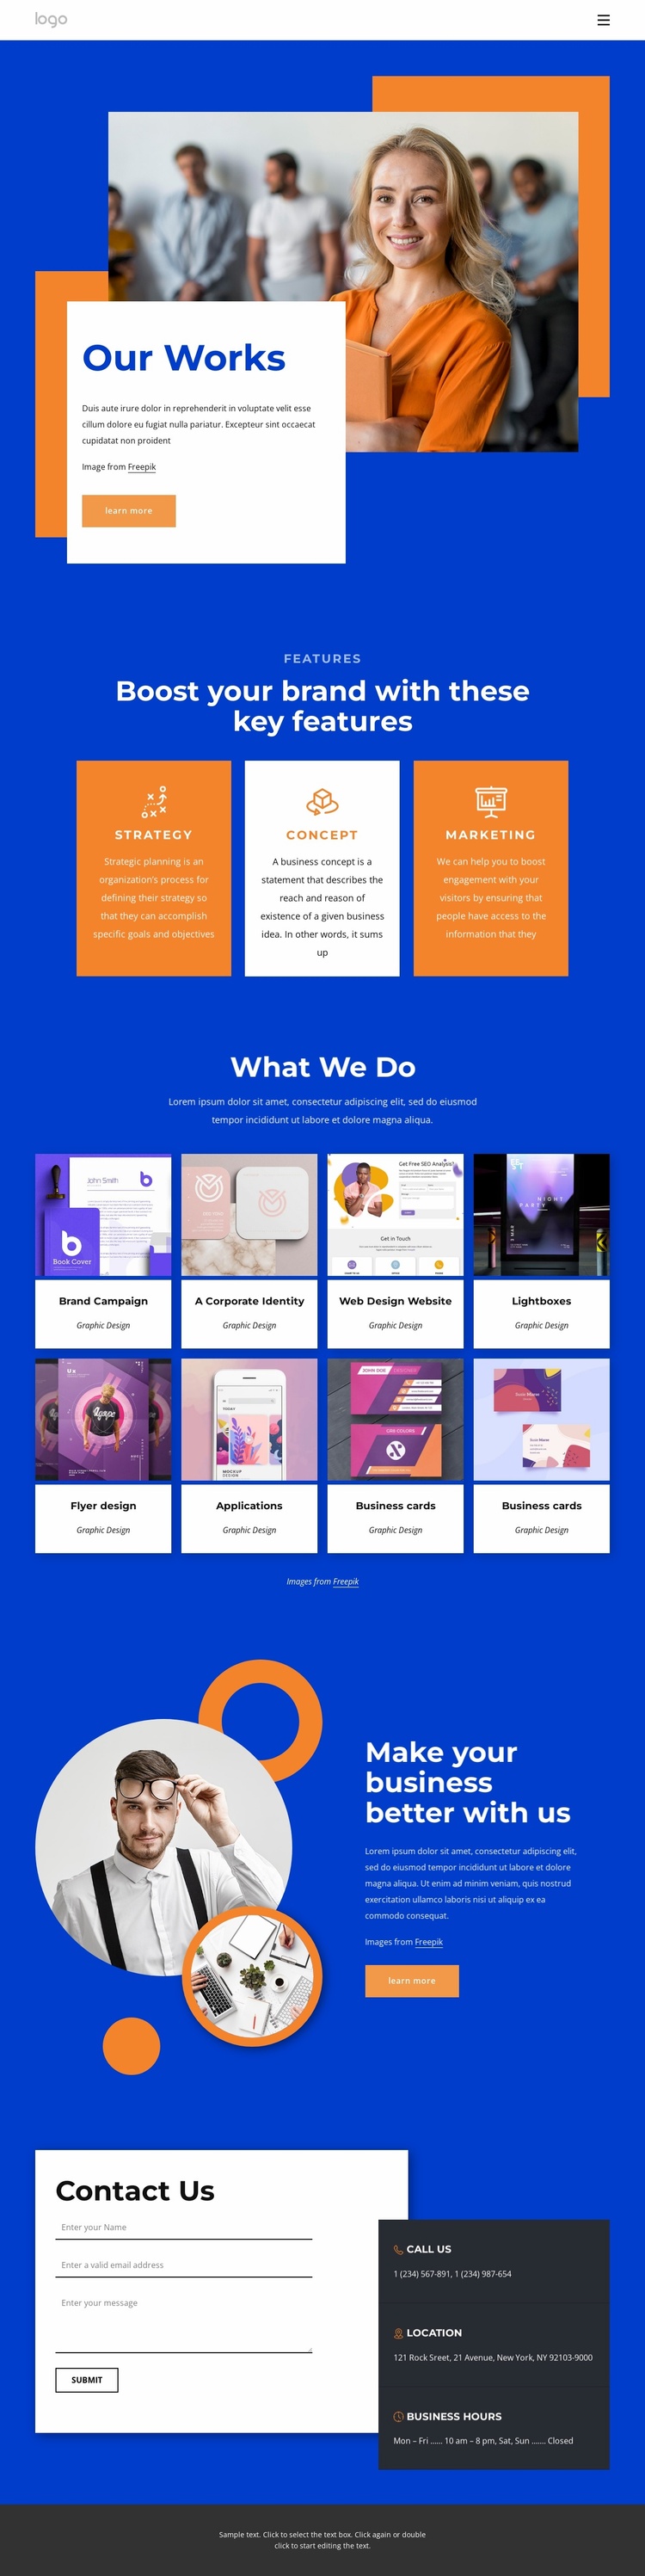 Web design for your small business Landing Page